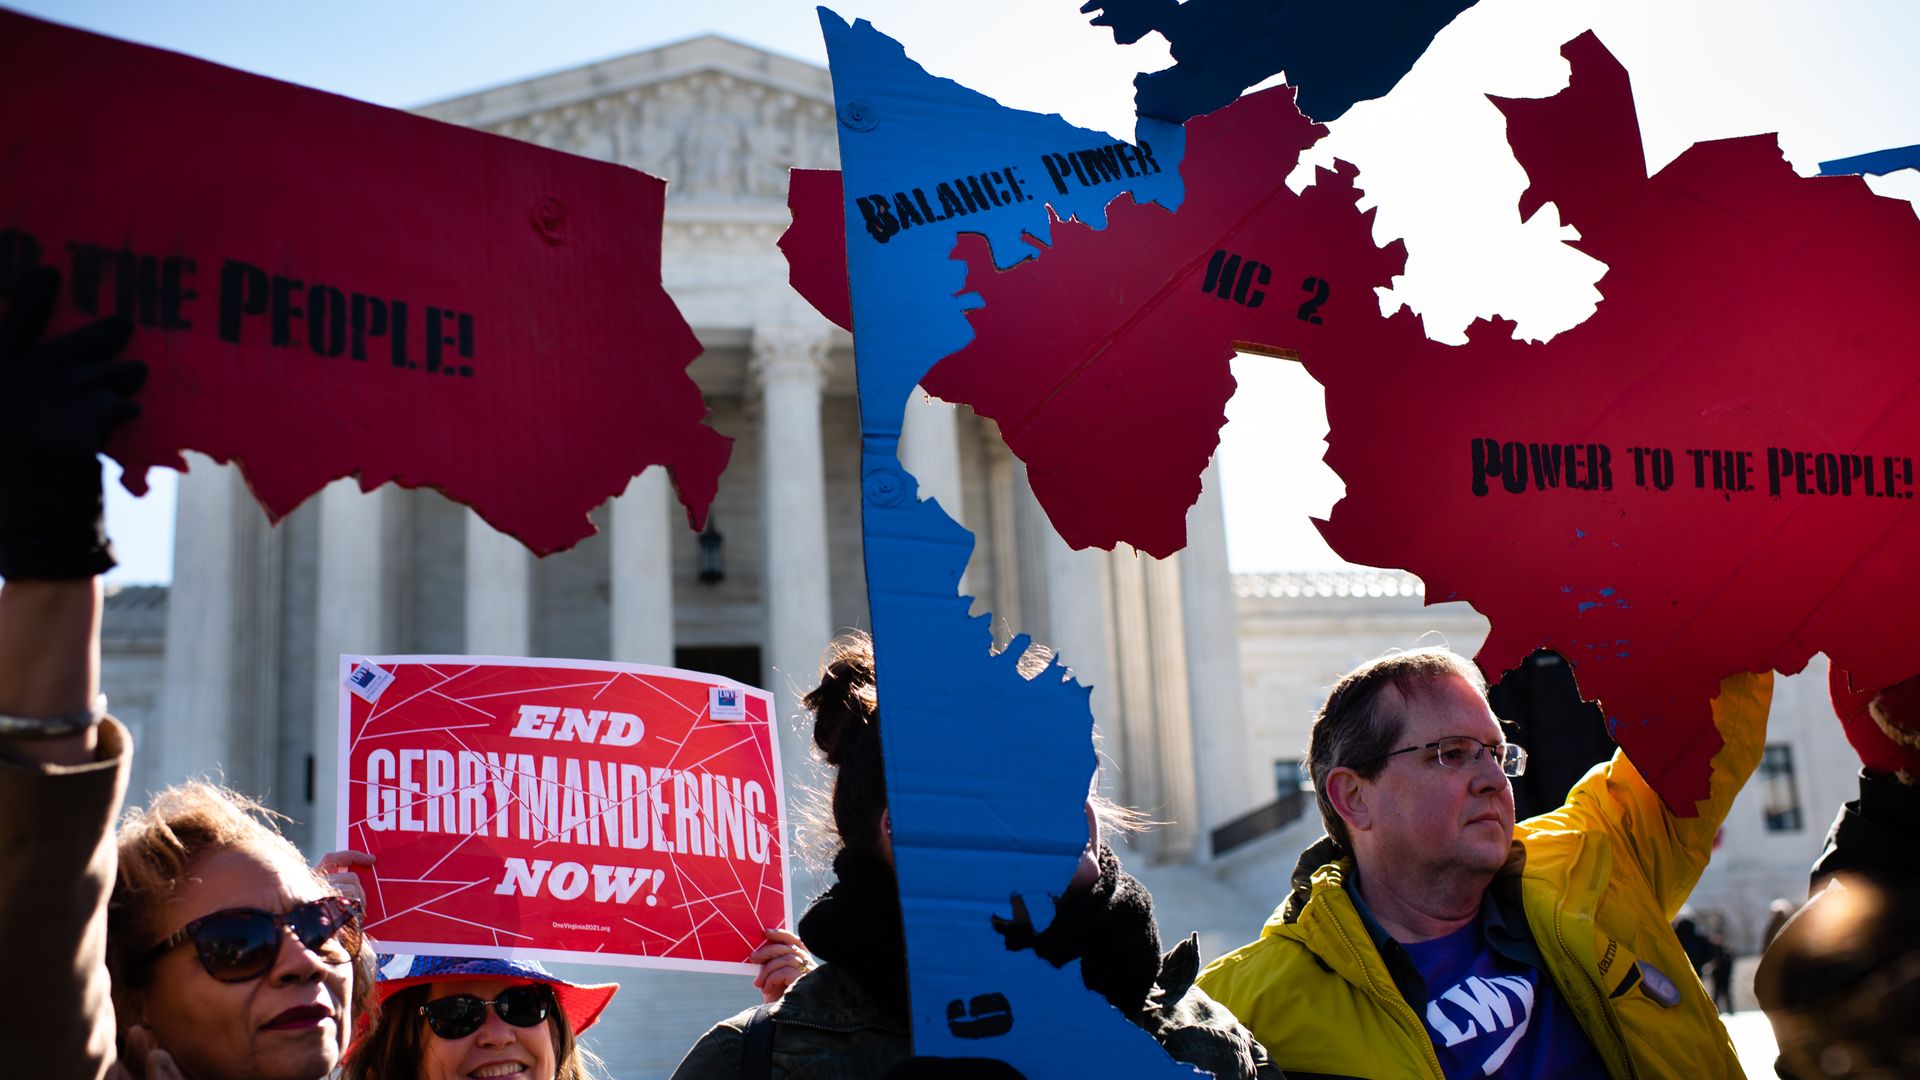 In this image, people in coats hold up signs that read "End Gerrymandering now" and "power to the people" while standing in front of the Supreme Court.